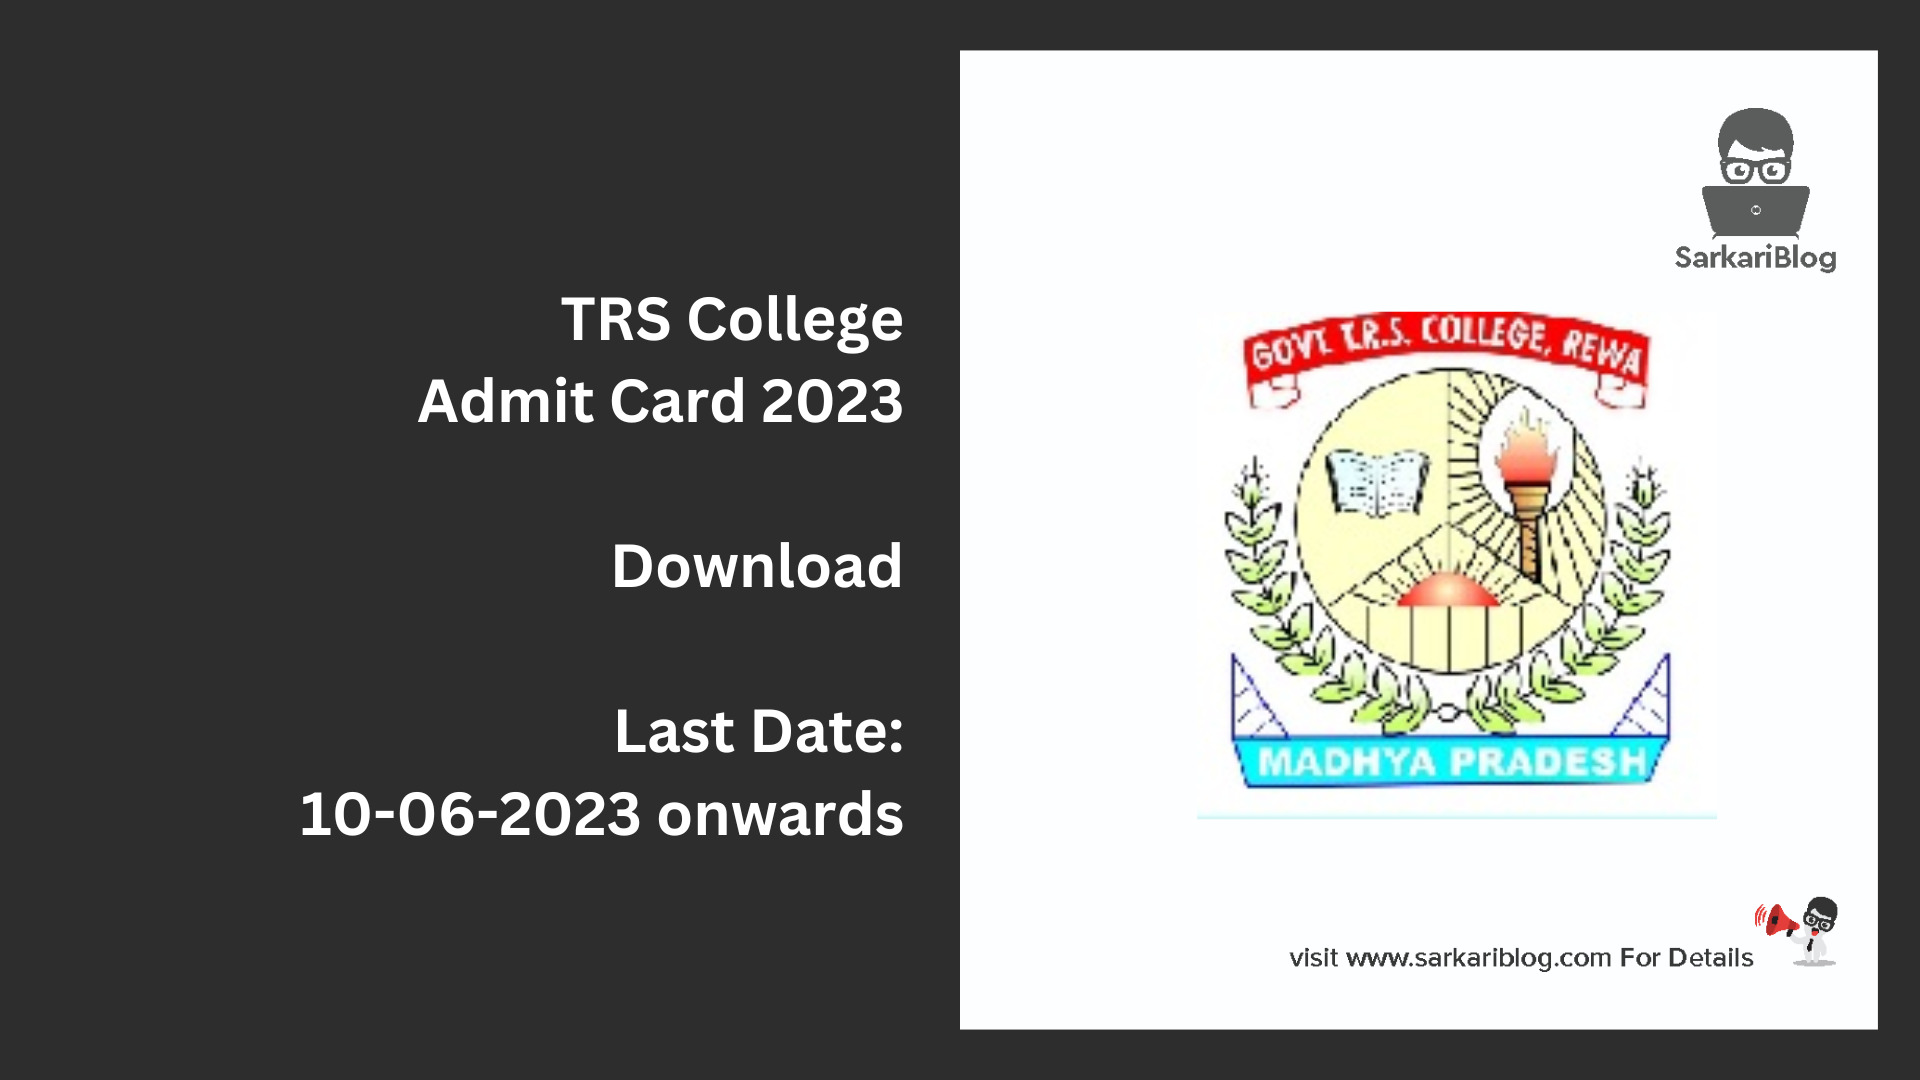 TRS College Admit Card 2023